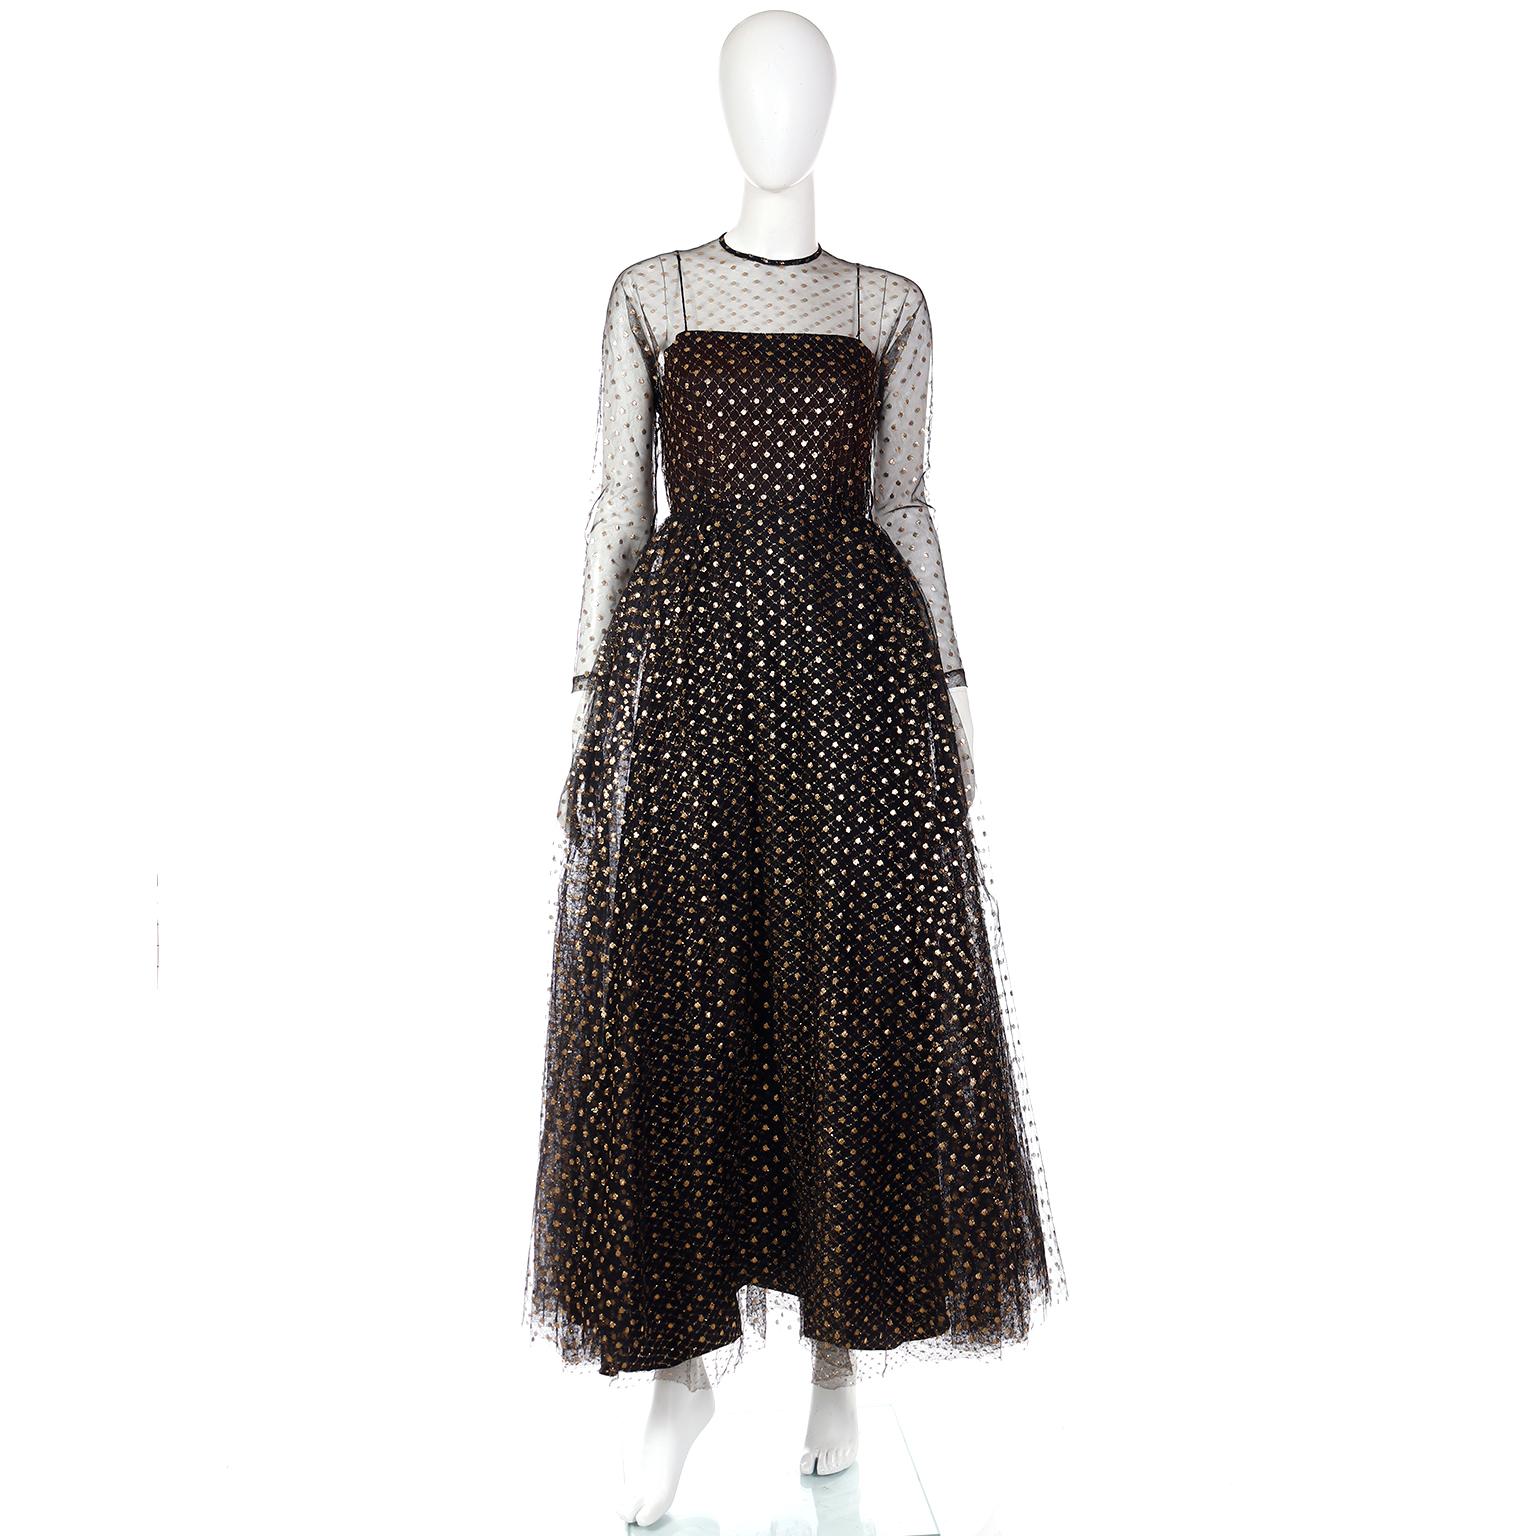 This is a lovely vintage Lillie Rubin black tulle dress with sparkling gold dots. This magical late 1970's dress has an under layer of black and gold diamond patterned mesh and a top layer with gold polka dots. There is also a layer of tulle to give